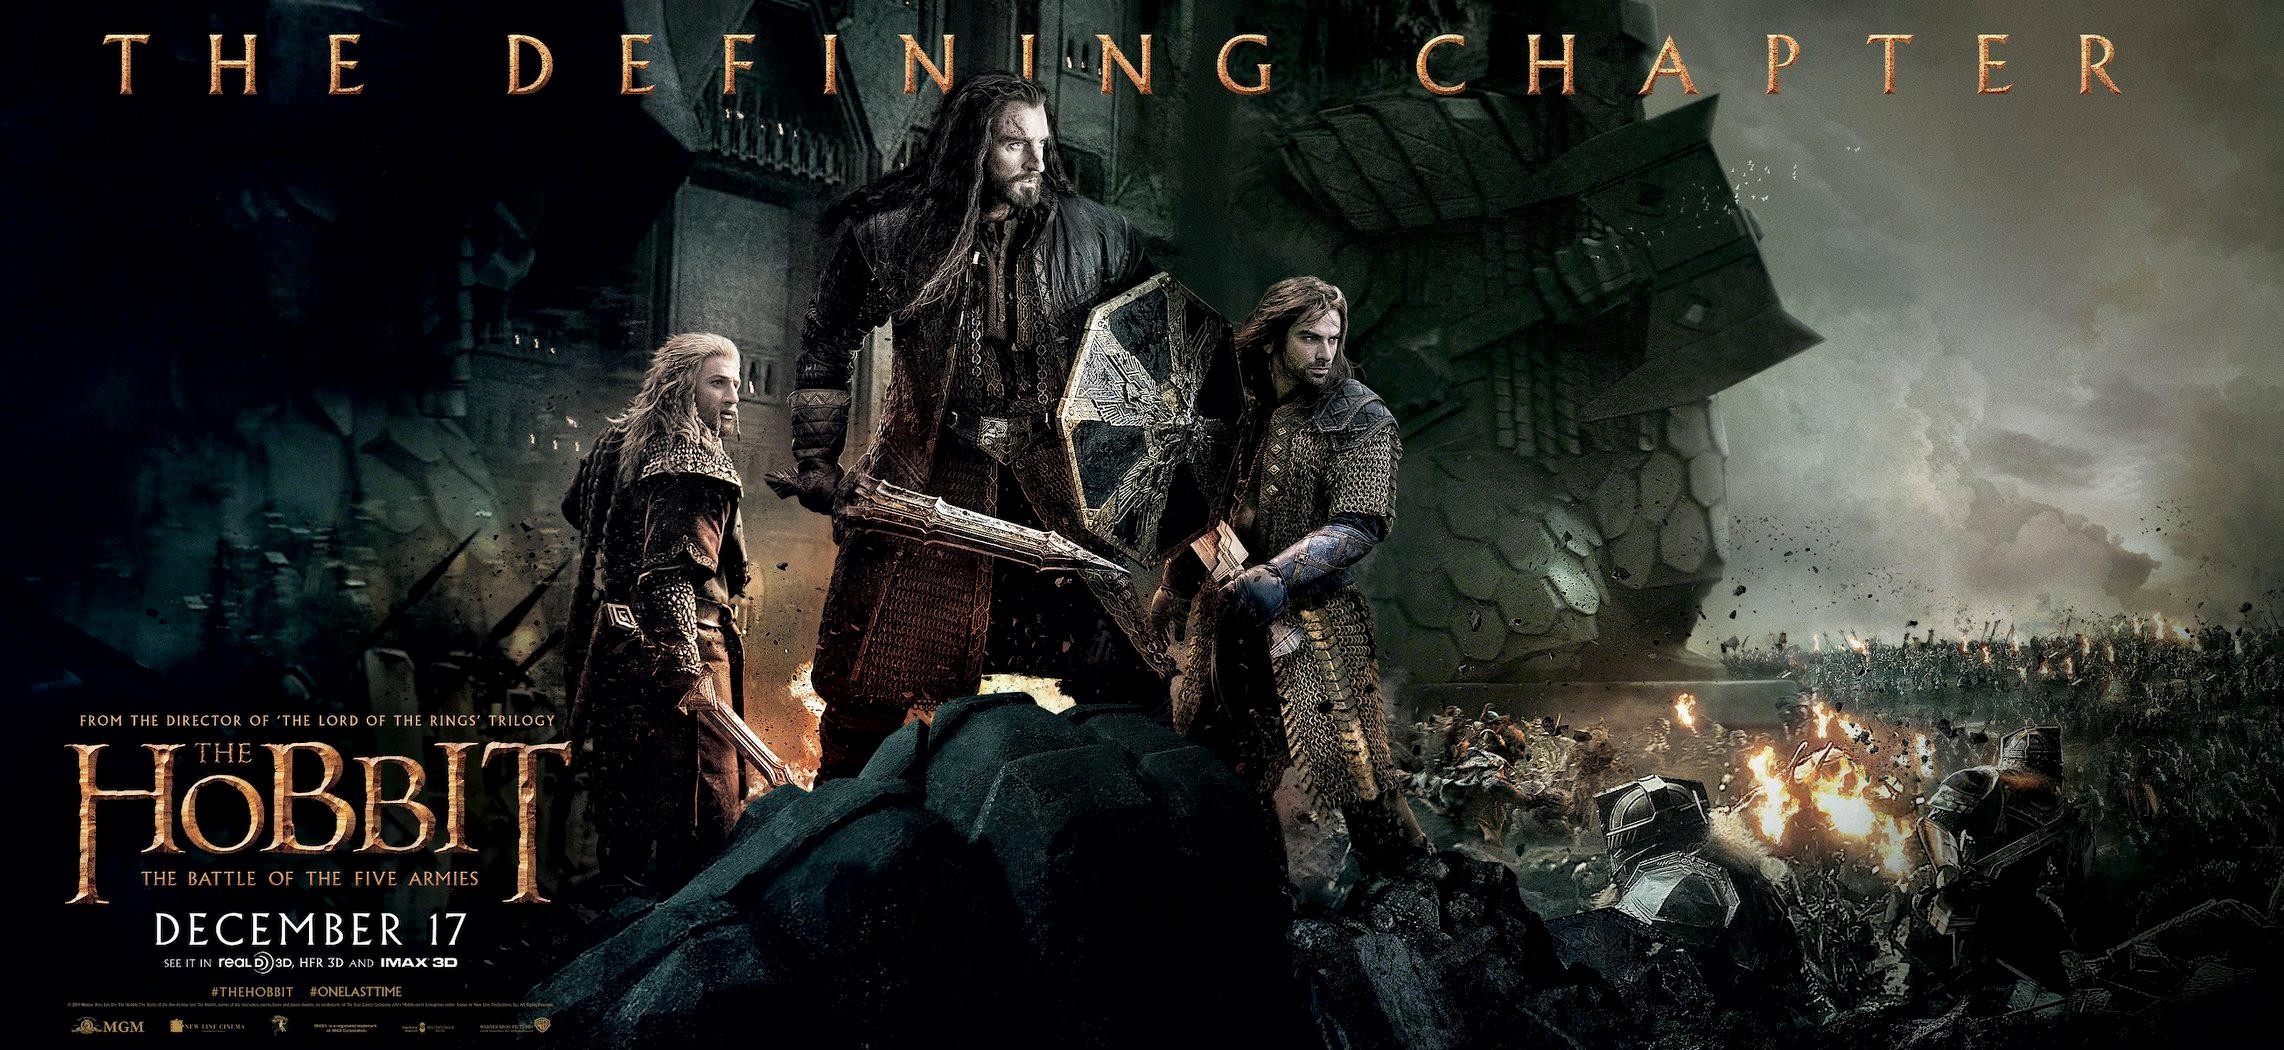 Mega Sized Movie Poster Image for The Hobbit: The Battle of the Five Armies (#22 of 28)